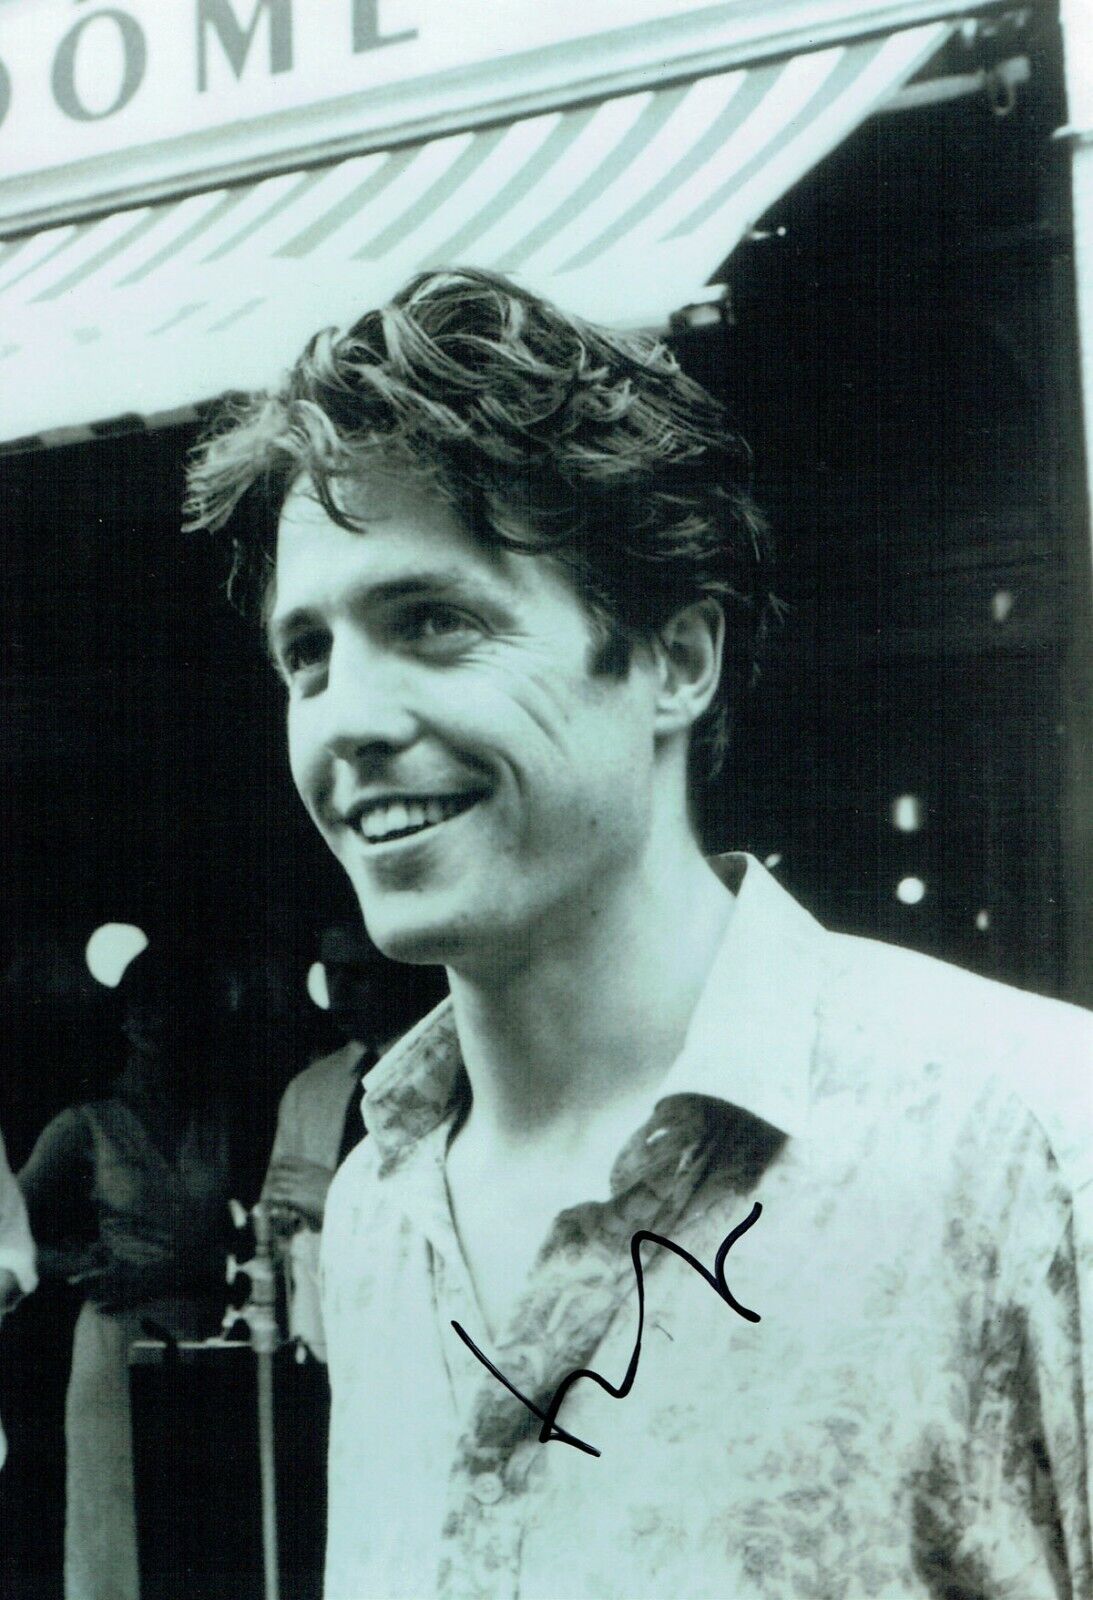 Hugh GRANT Signed Autograph RARE Photo Poster painting AFTAL RD COA Four Weddings and a Funeral